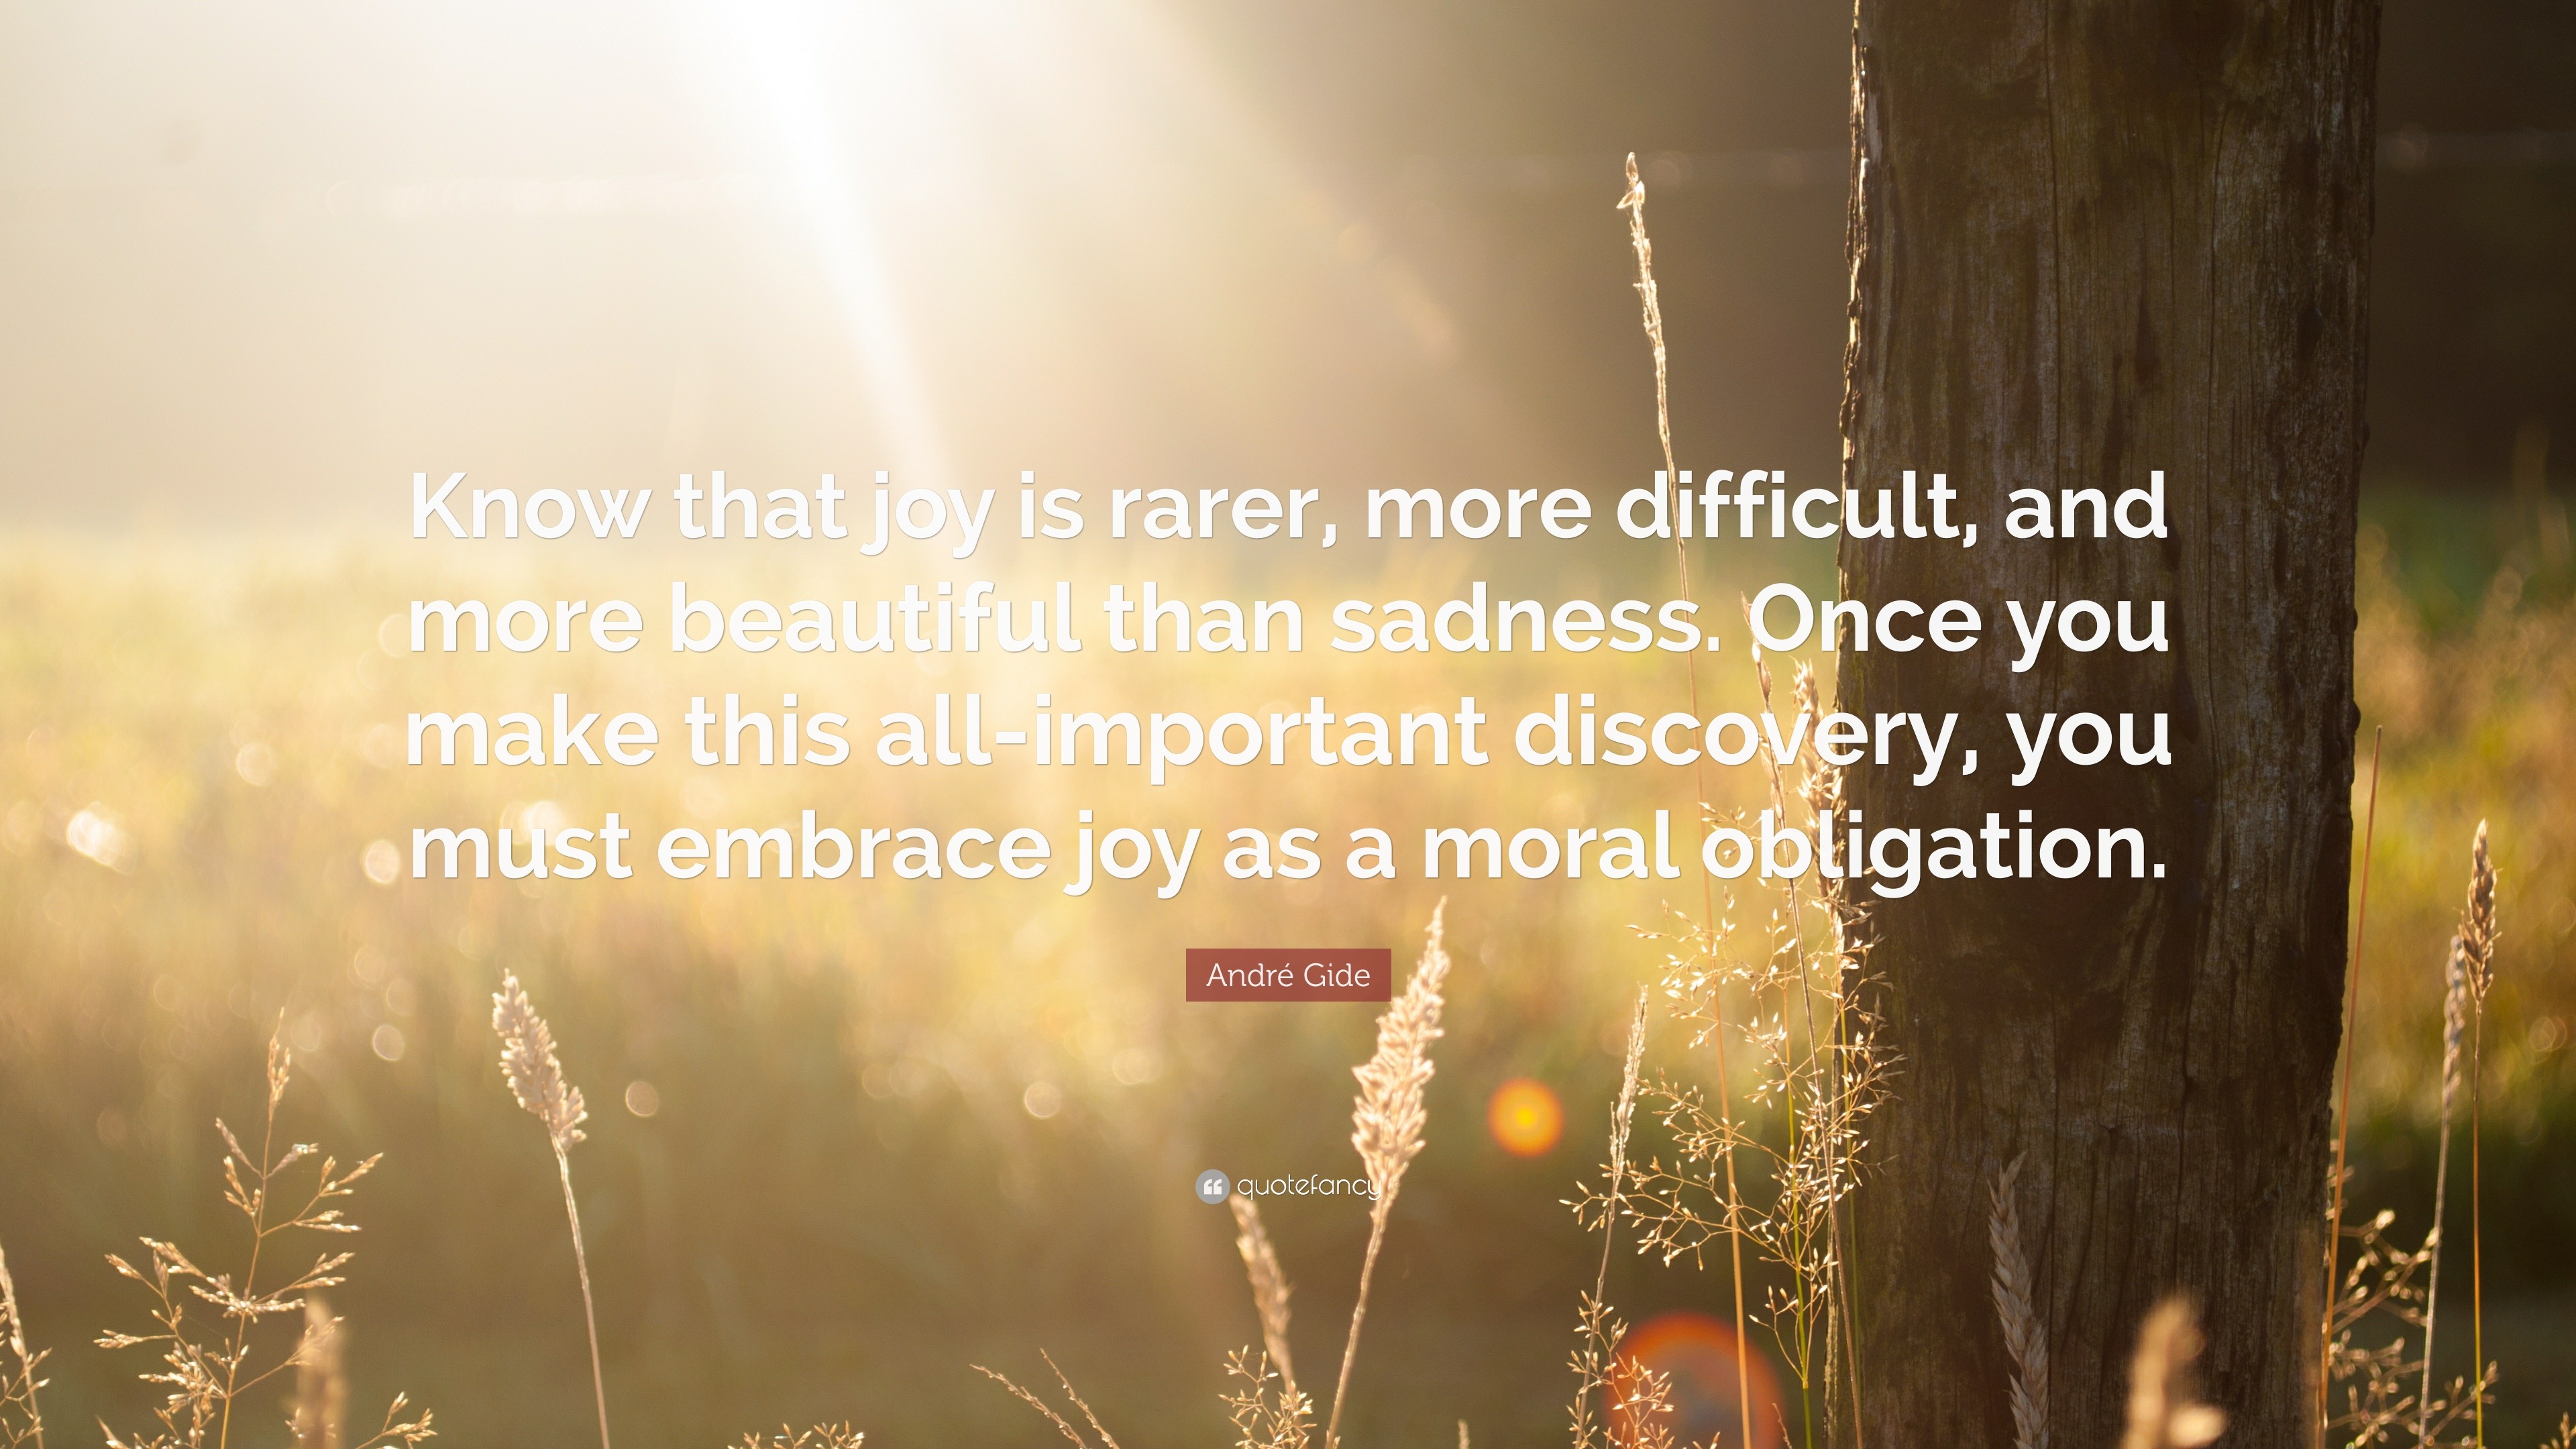 André Gide Quote: “Know that joy is rarer, more difficult, and more ...